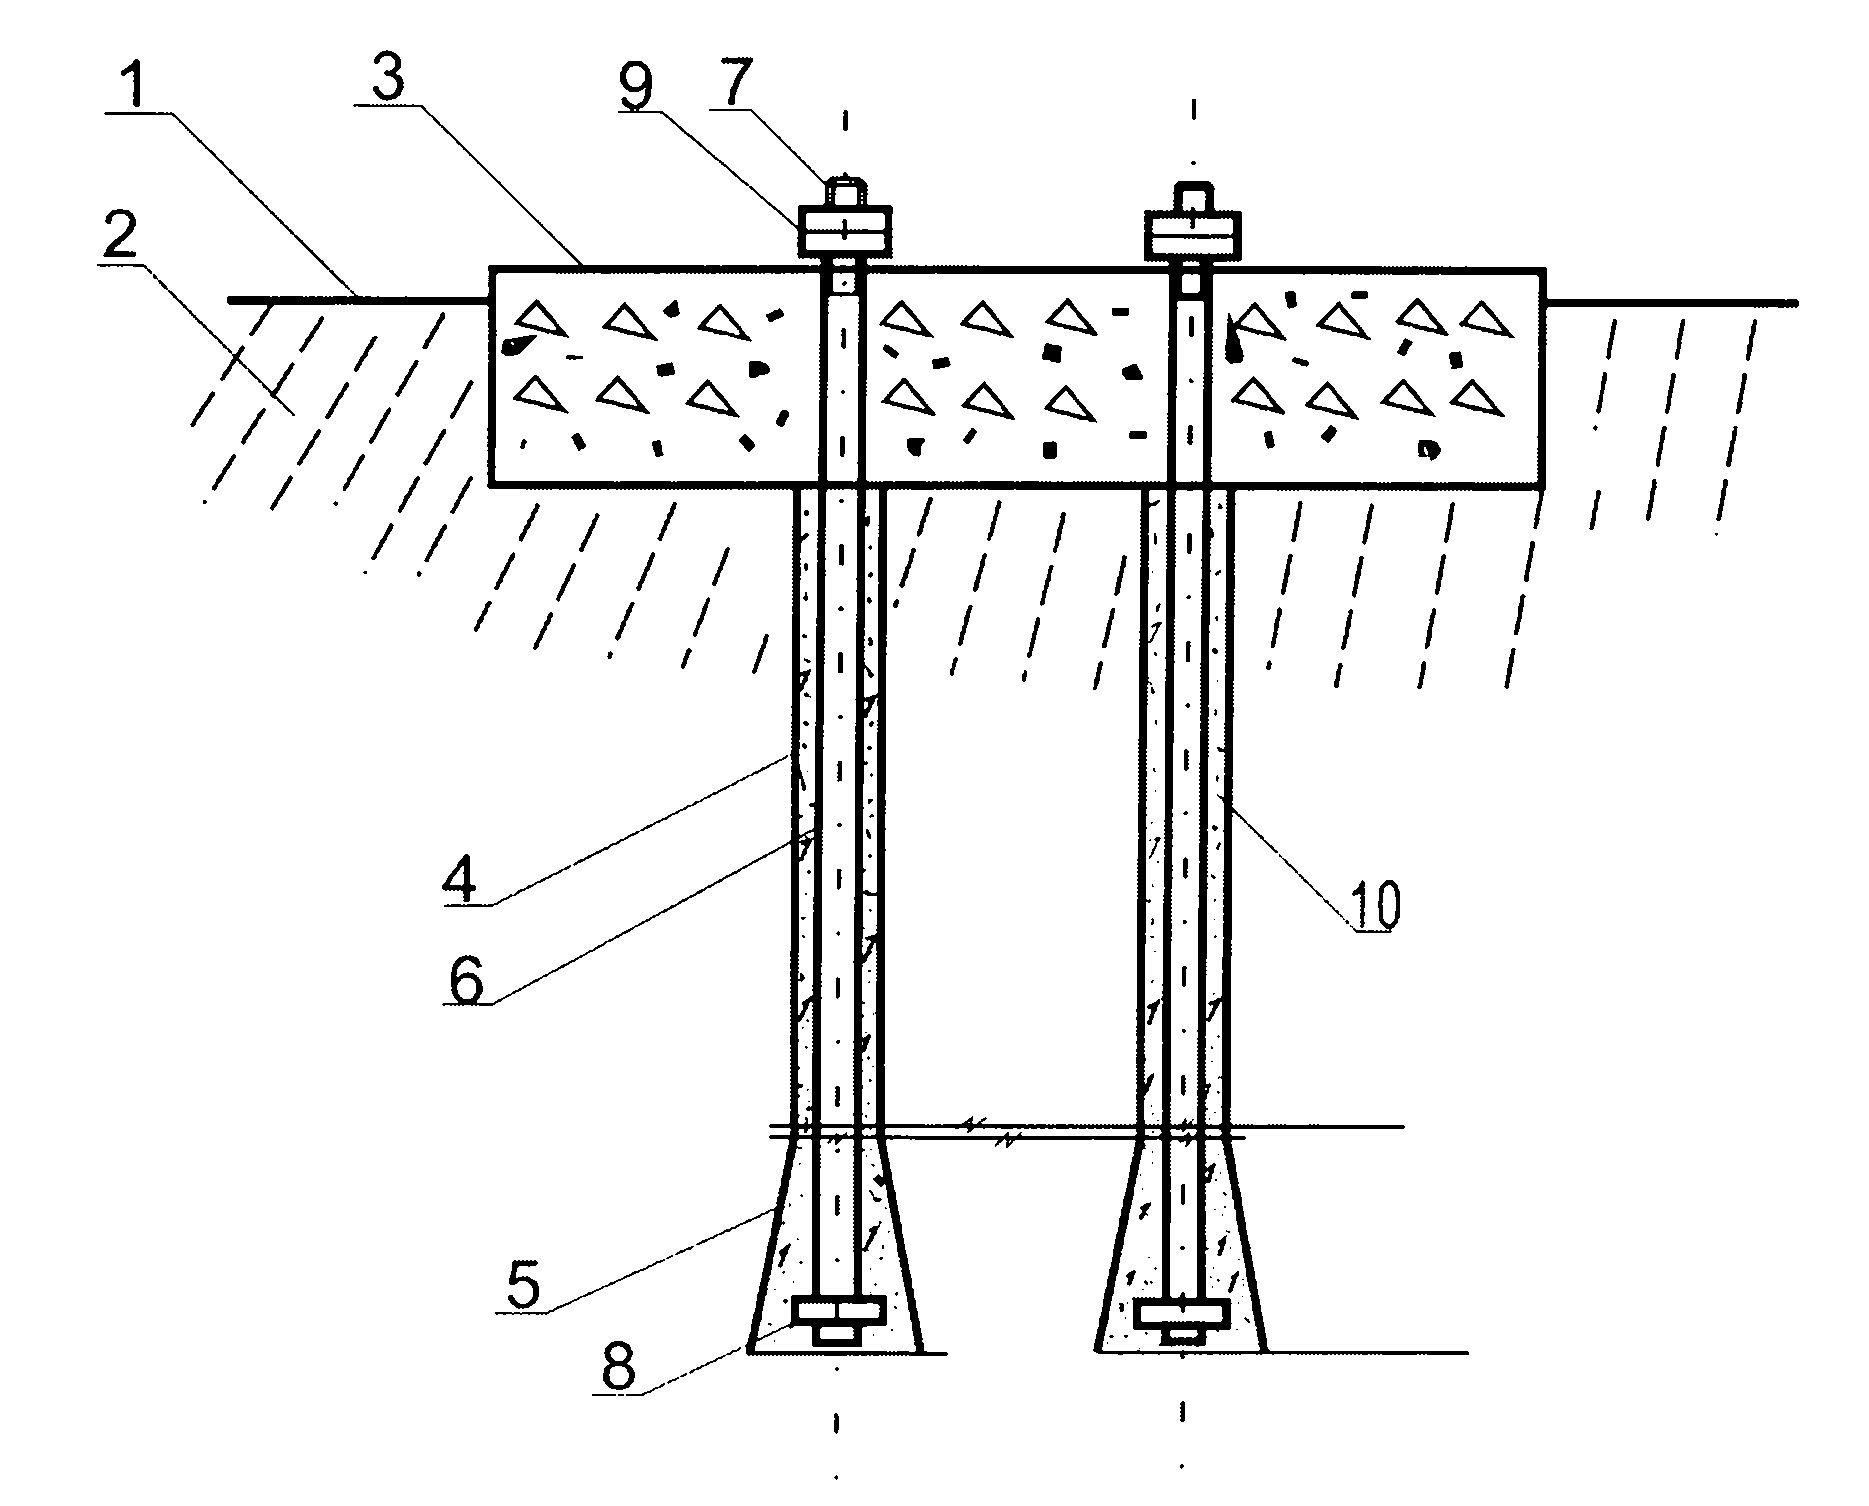 Construction process for rock enlarged toe anchor pile foundation of overhead power transmission line